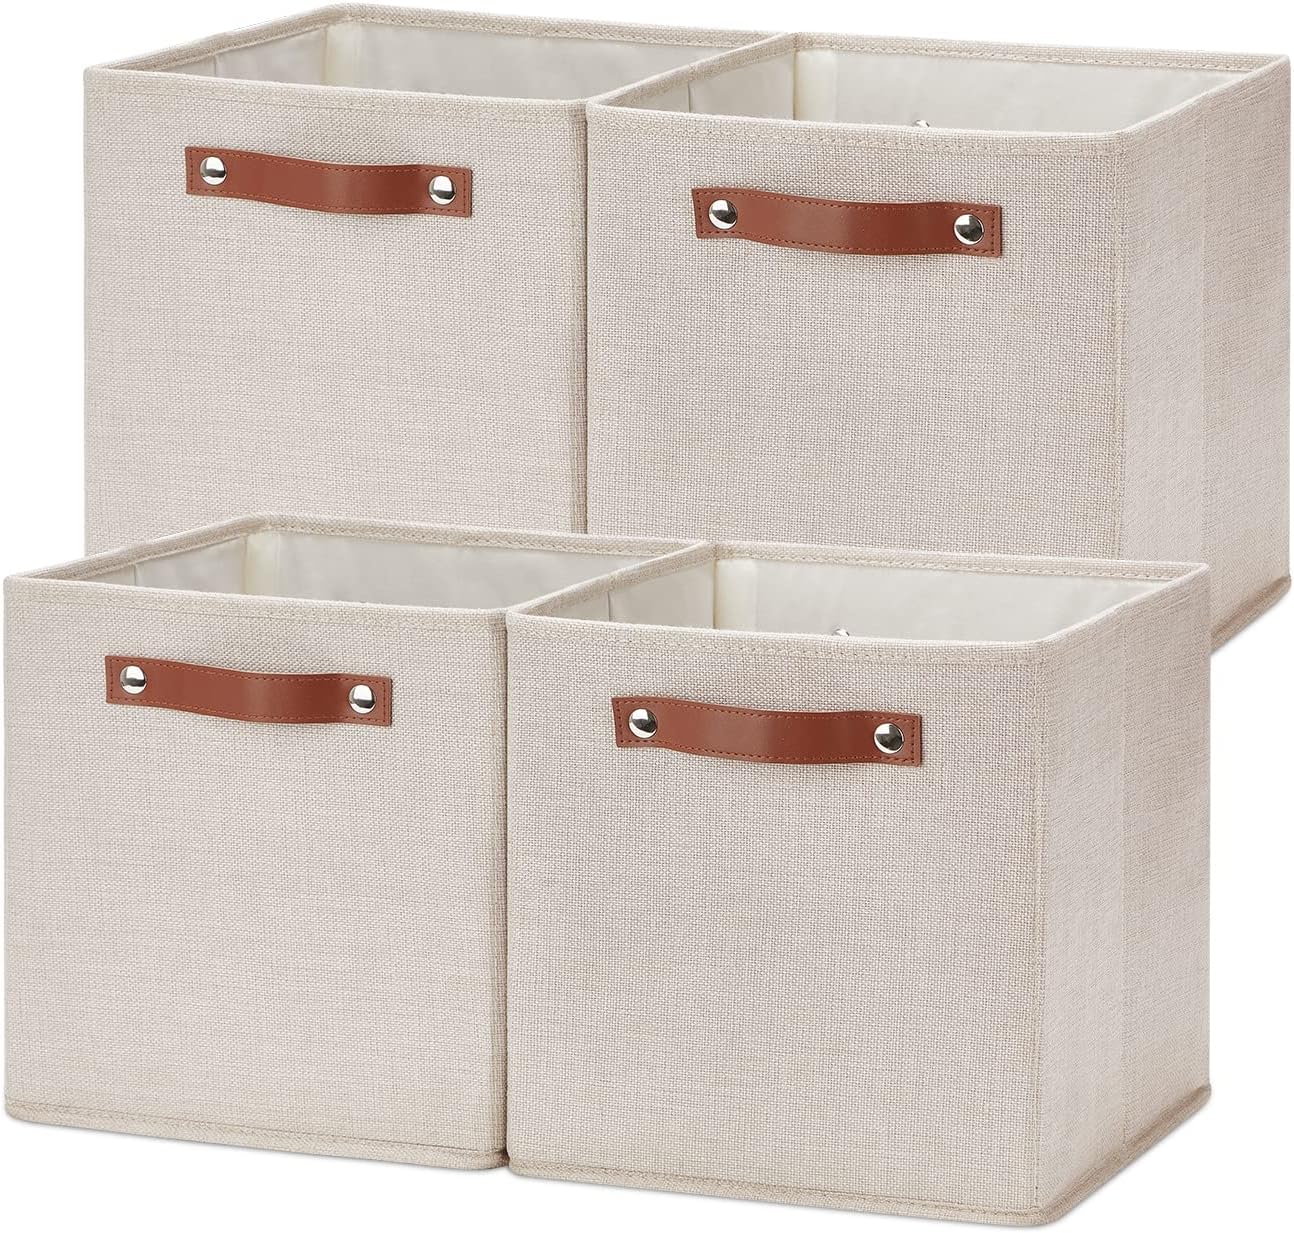 Temary 11x11 Storage Cubes Fabric Storage Cubes Storage Bins with Dual Leather Handles Canvas Storage Boxes for Organizing Home, Office, Nursery, Shelf, Closet (Beige, 11 x 11 x 11)